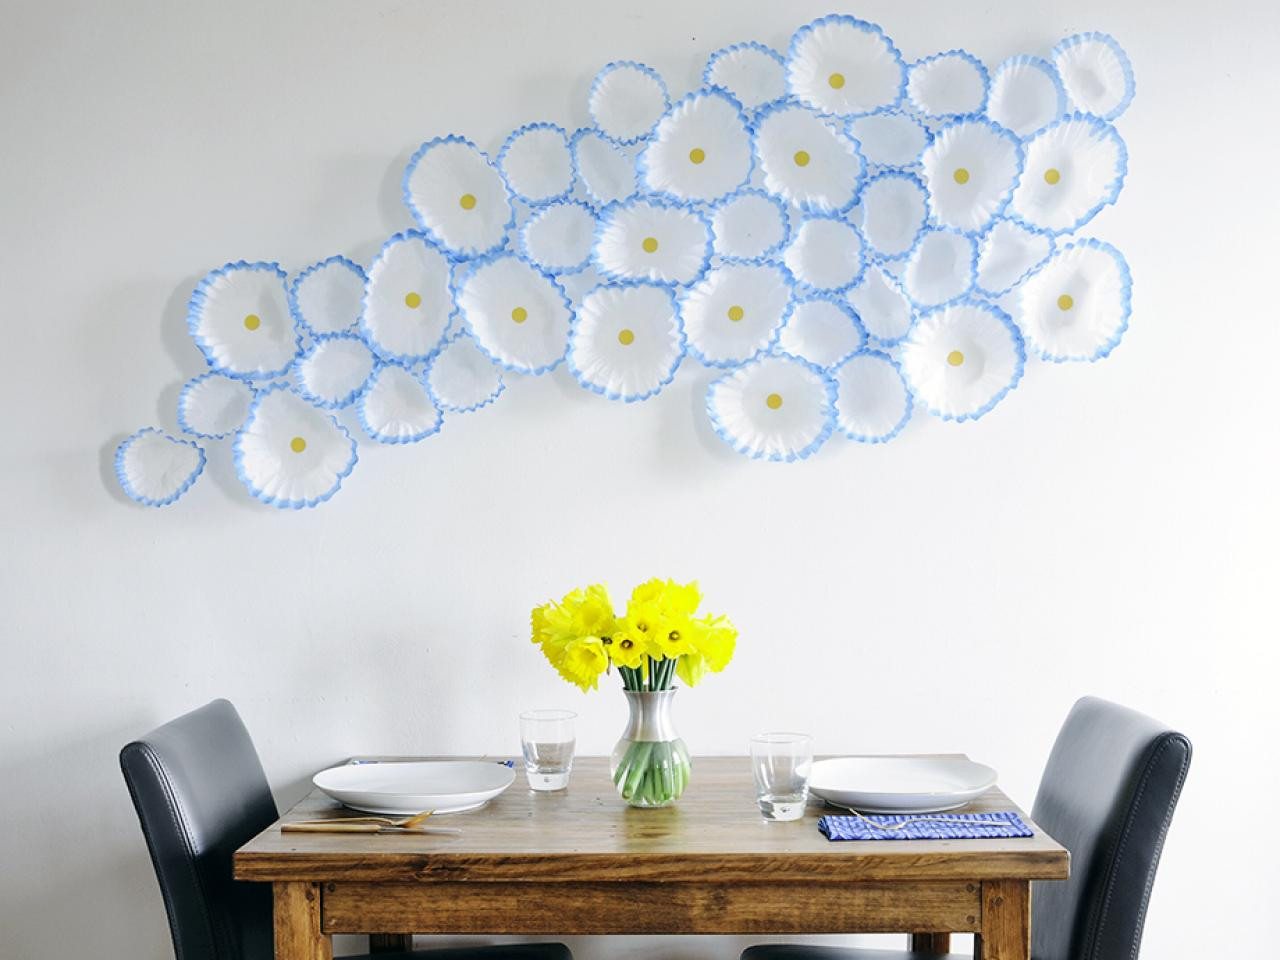 DIY Wall Decoration Ideas
 10 easy and cheap DIY ideas for decorating walls